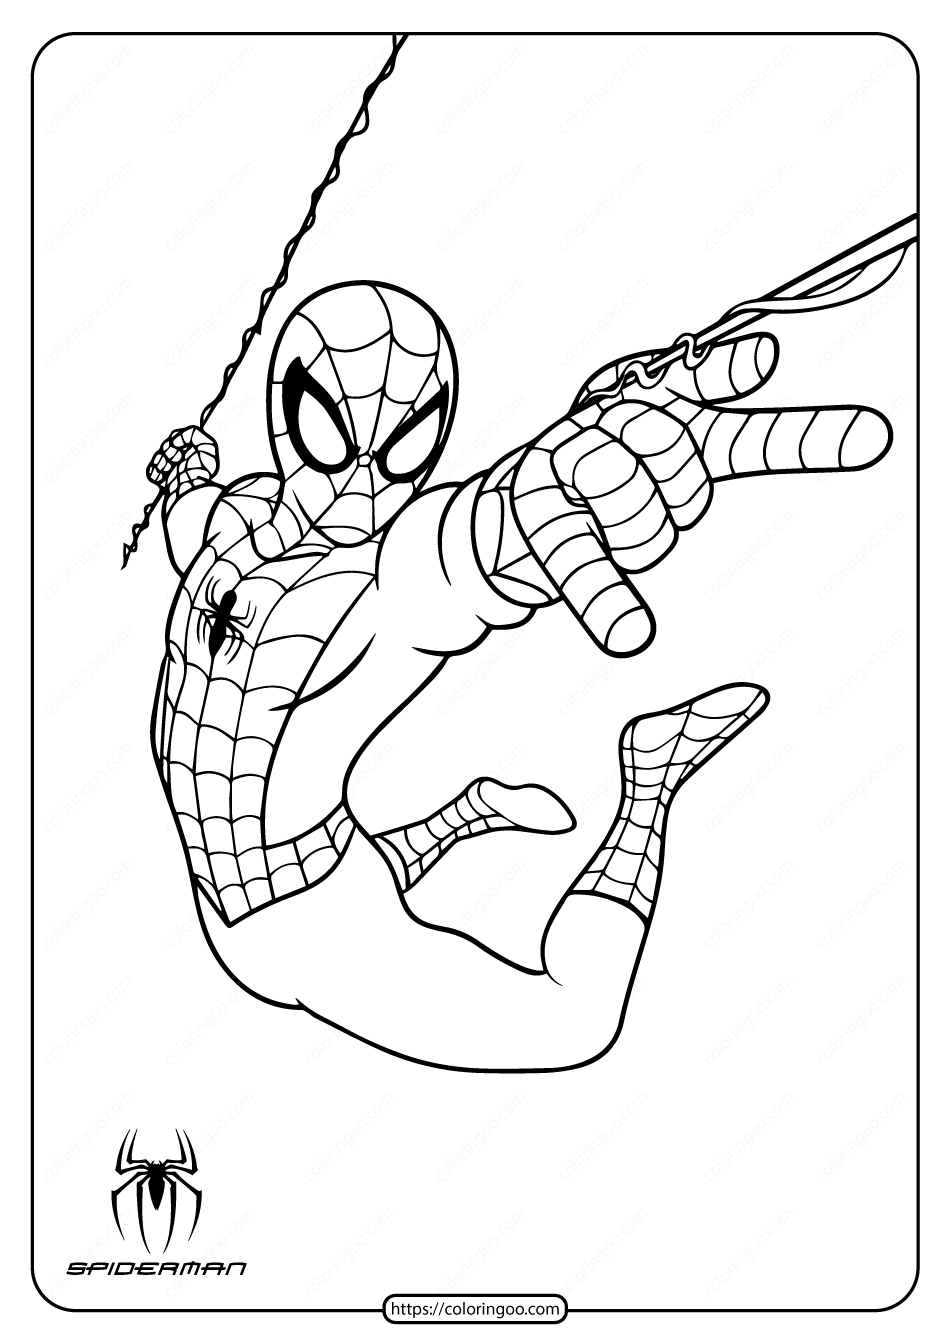 Printable spiderman in action coloring page spiderman drawing spiderman coloring superhero coloring